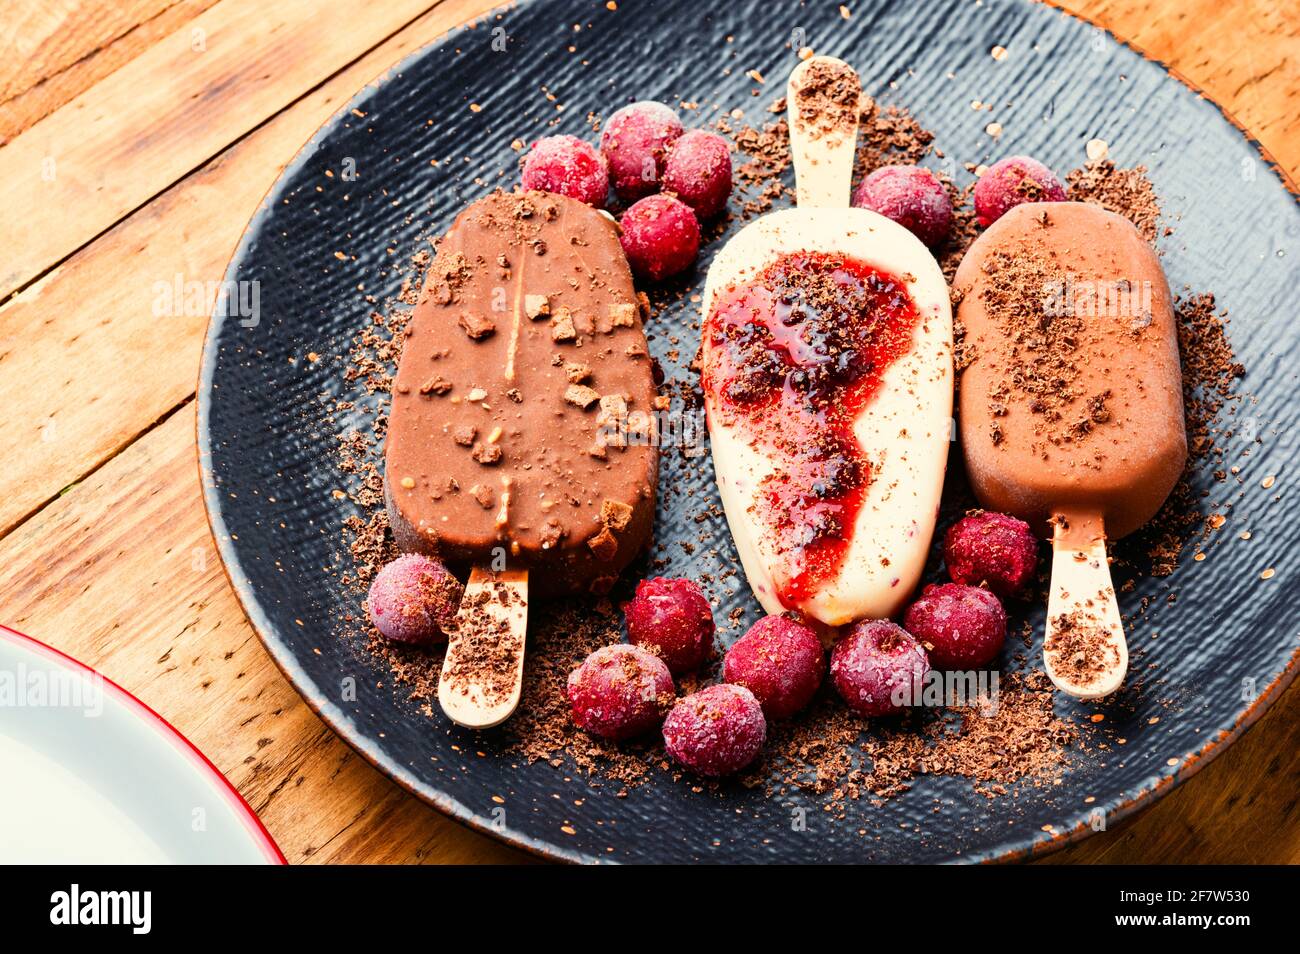 Ice cream on sticks with chocolate.Delicious popsicles covered with chocolate Stock Photo